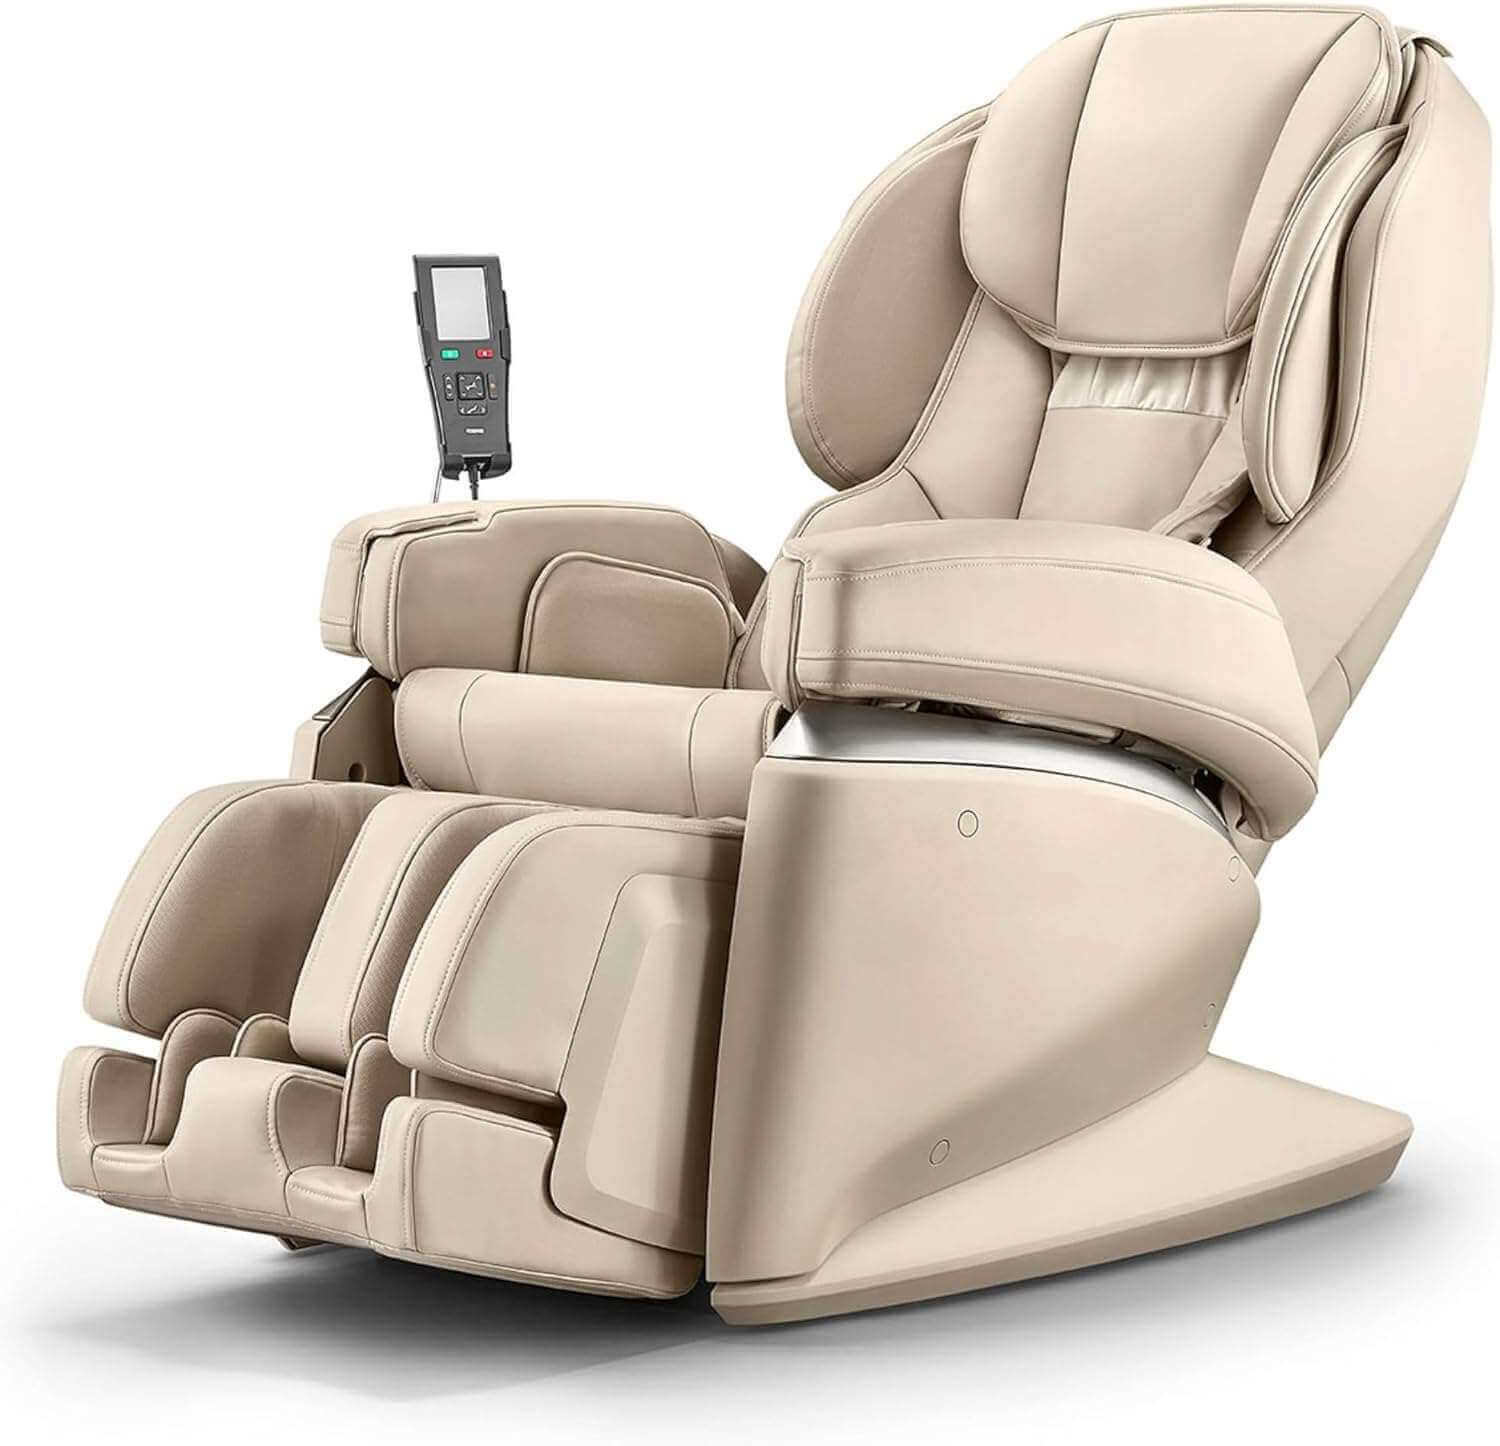 Synca Wellness JP1100 - Deluxe 4D Zero Gravity Massage Chair - Electric Massaging Chairs